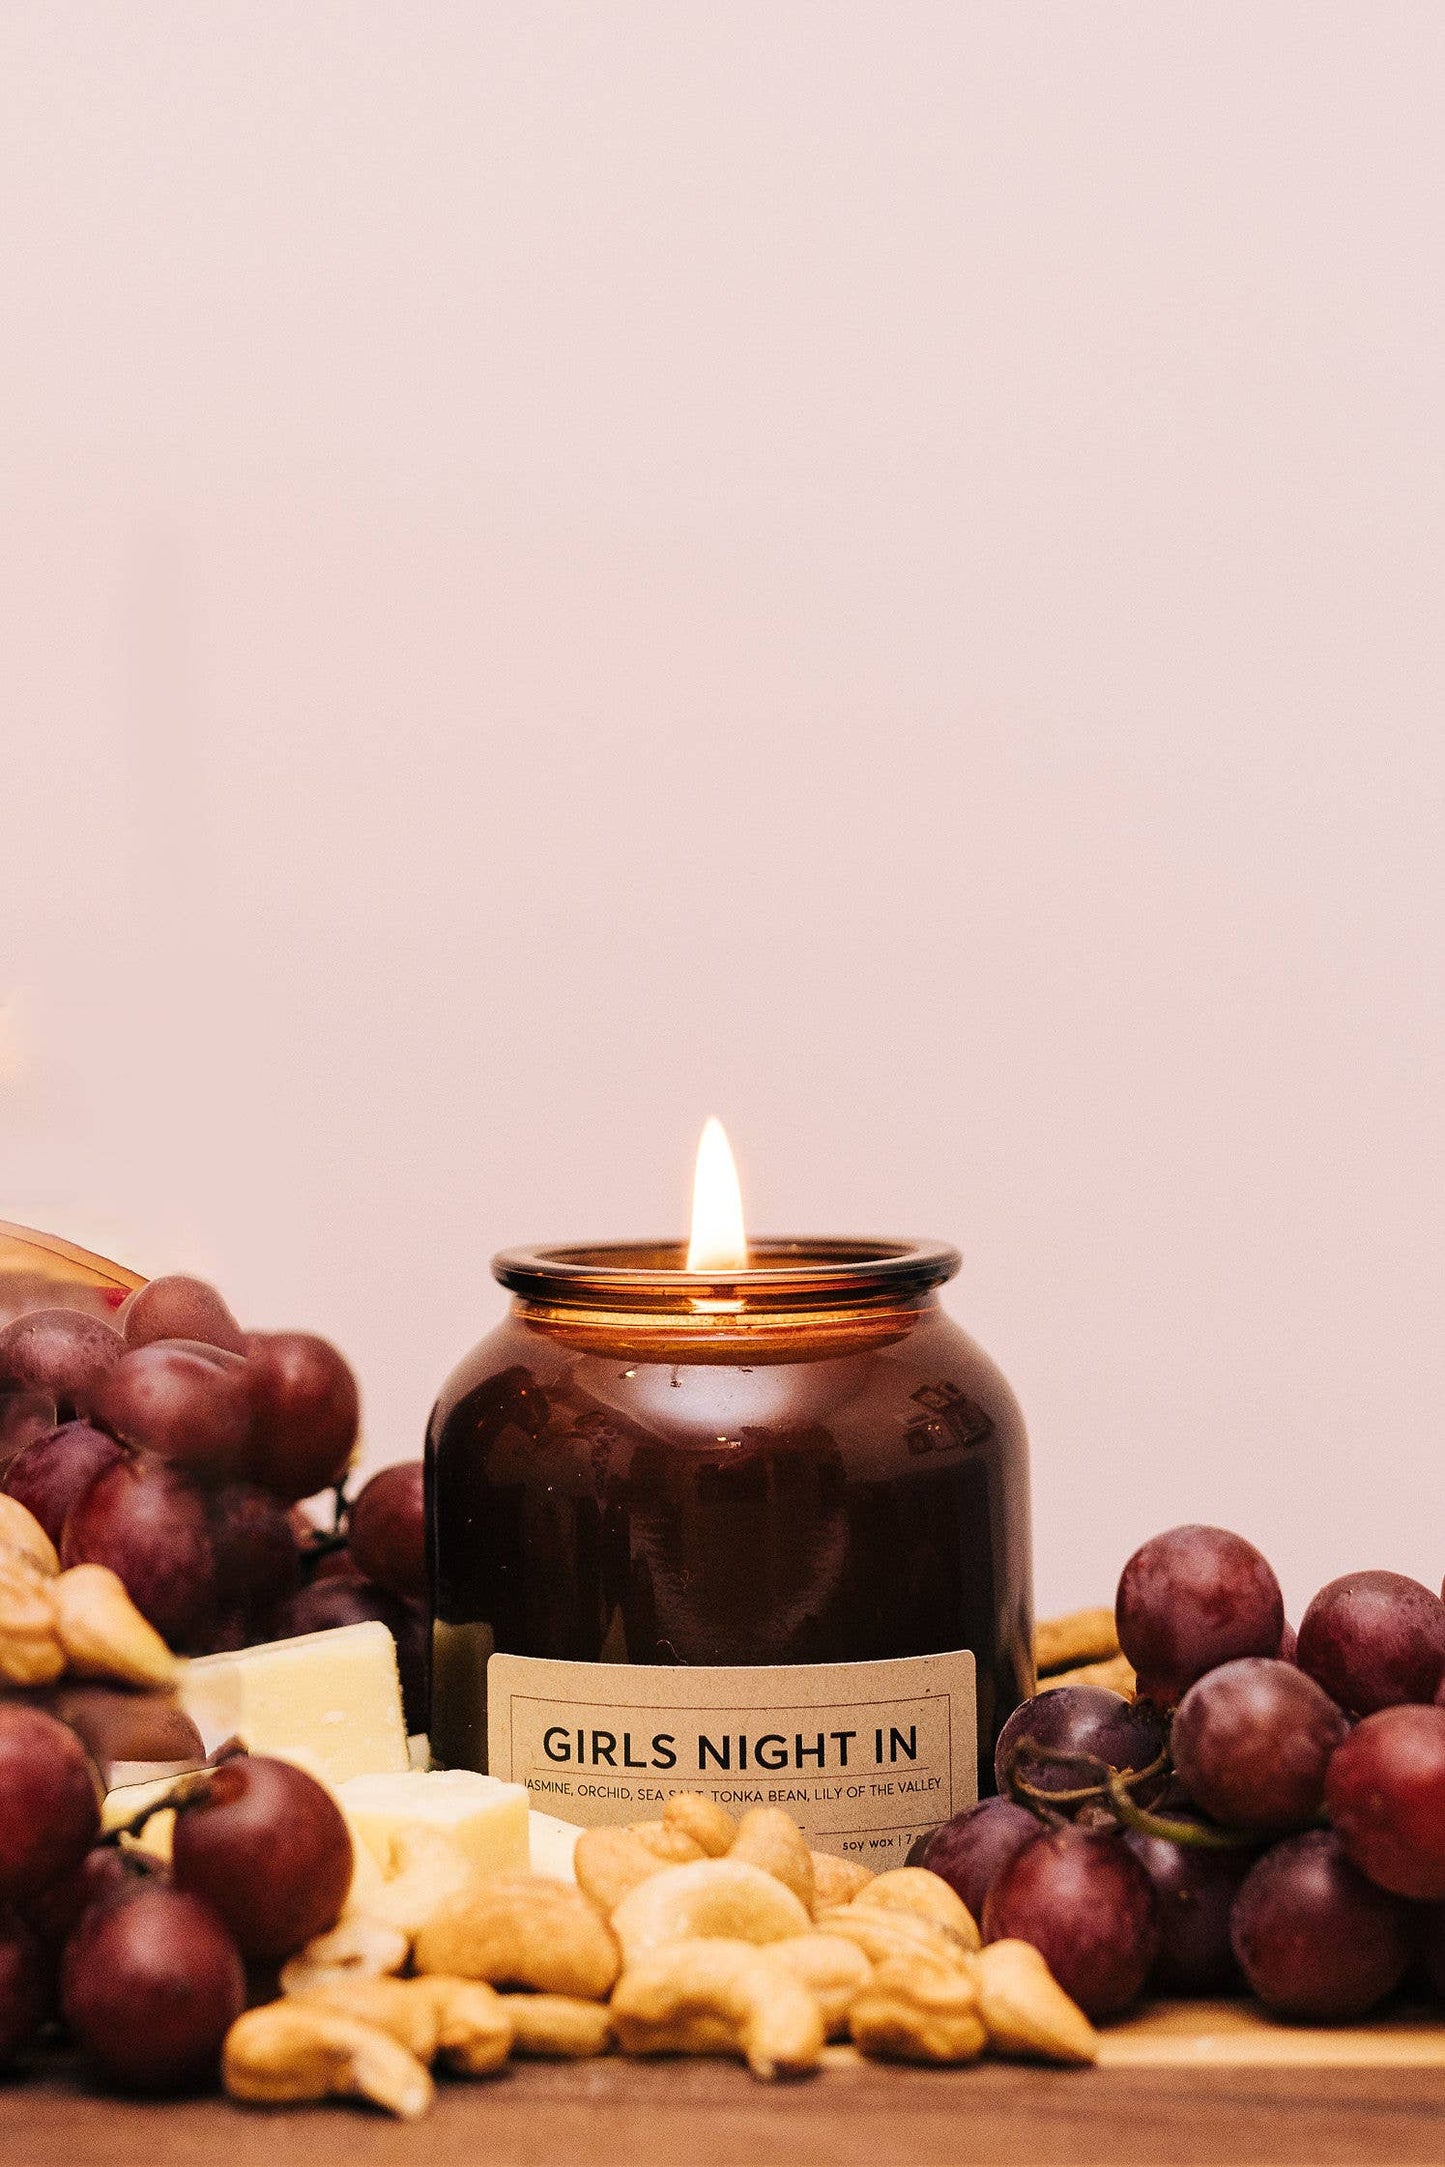 Girls Night In 7oz Soy Candle